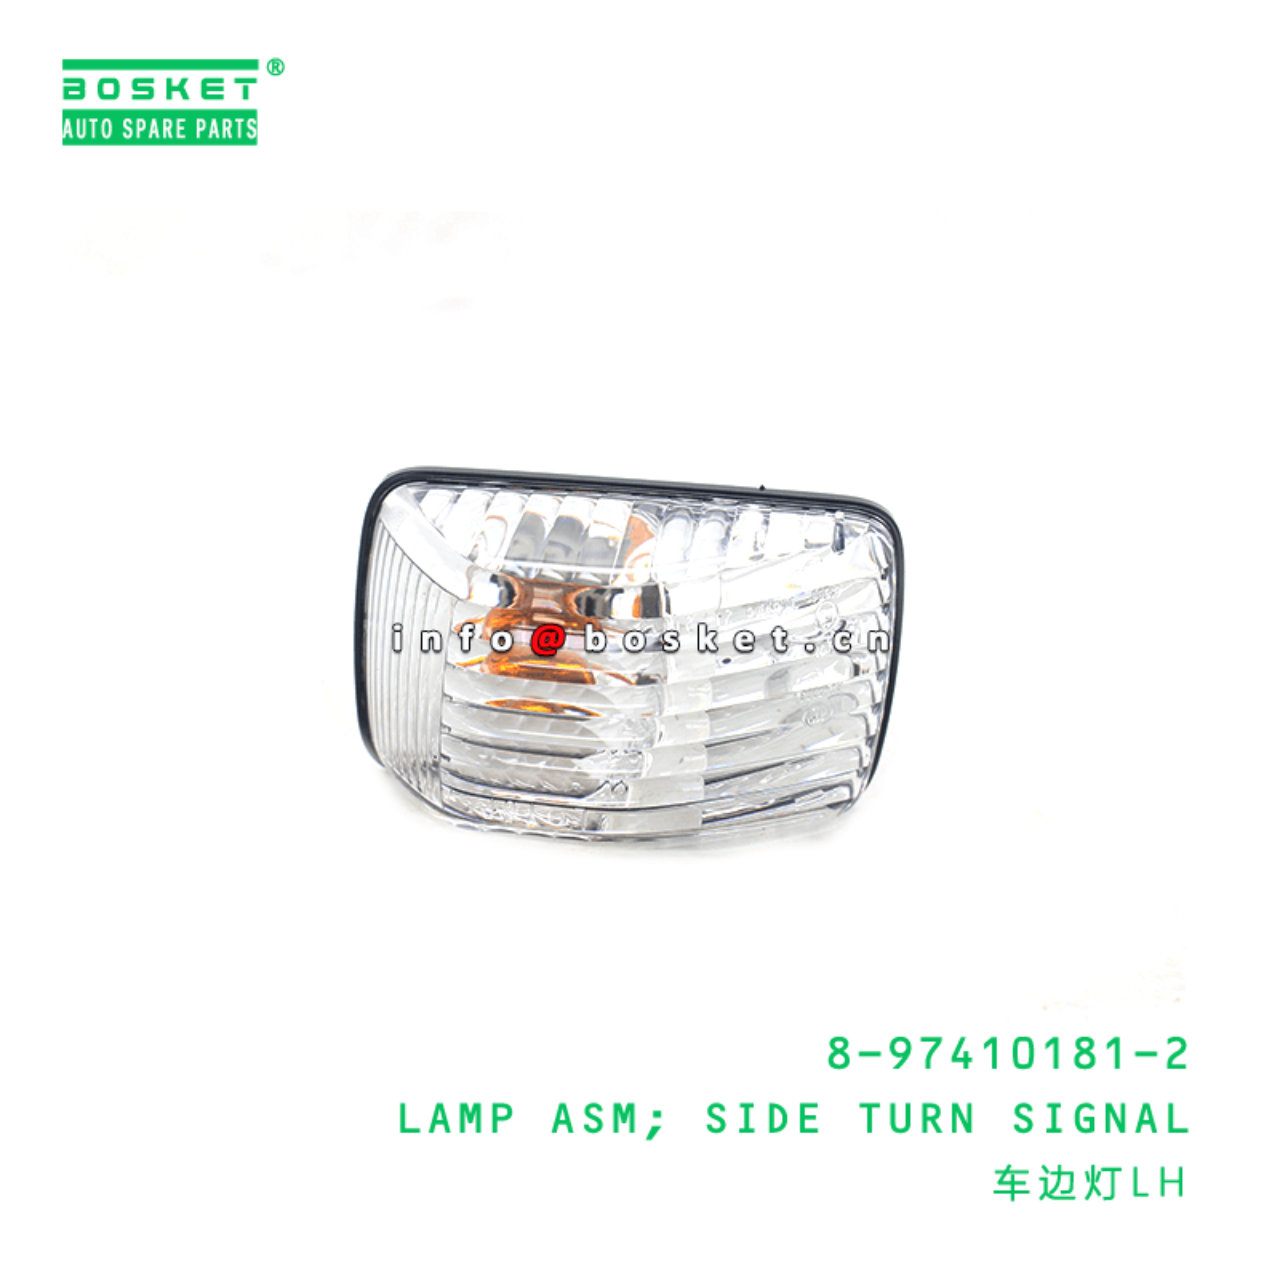 8-97410181-2 Side Turn Signal Lamp Assembly 8974101812 Suitable for ISUZU ELF 700P 4HK1